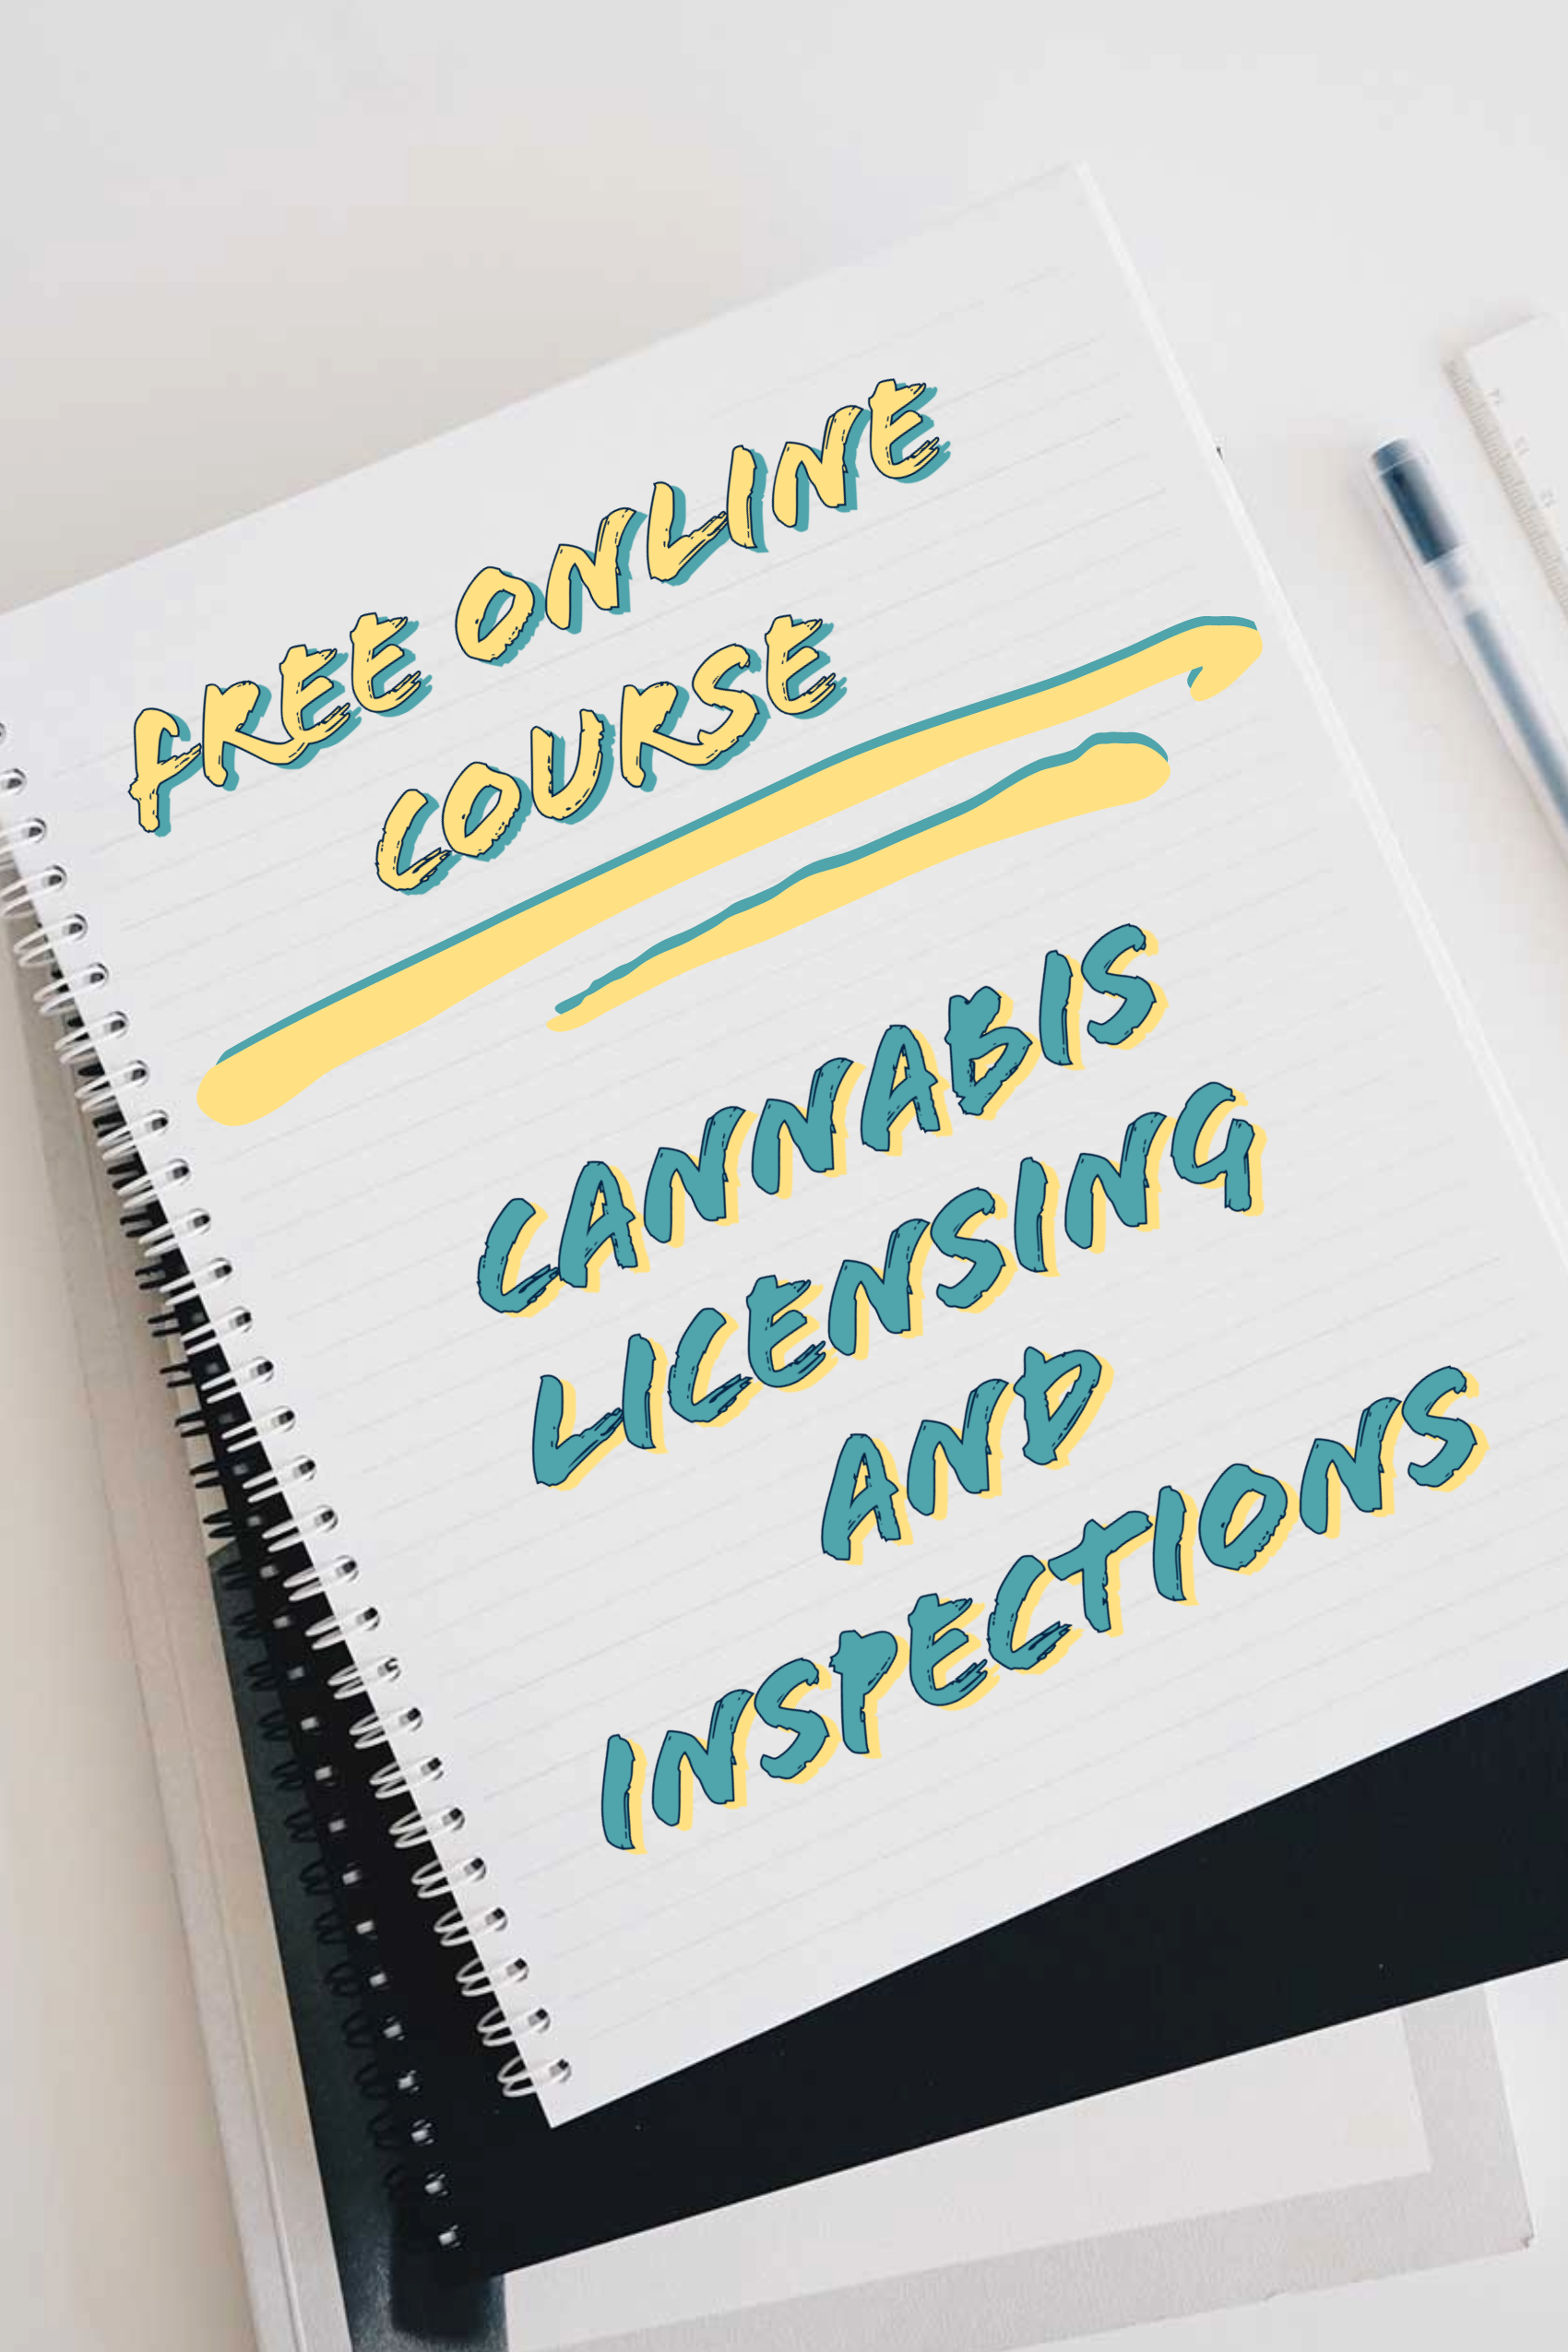 Cannabis Licensing and Inspections Course